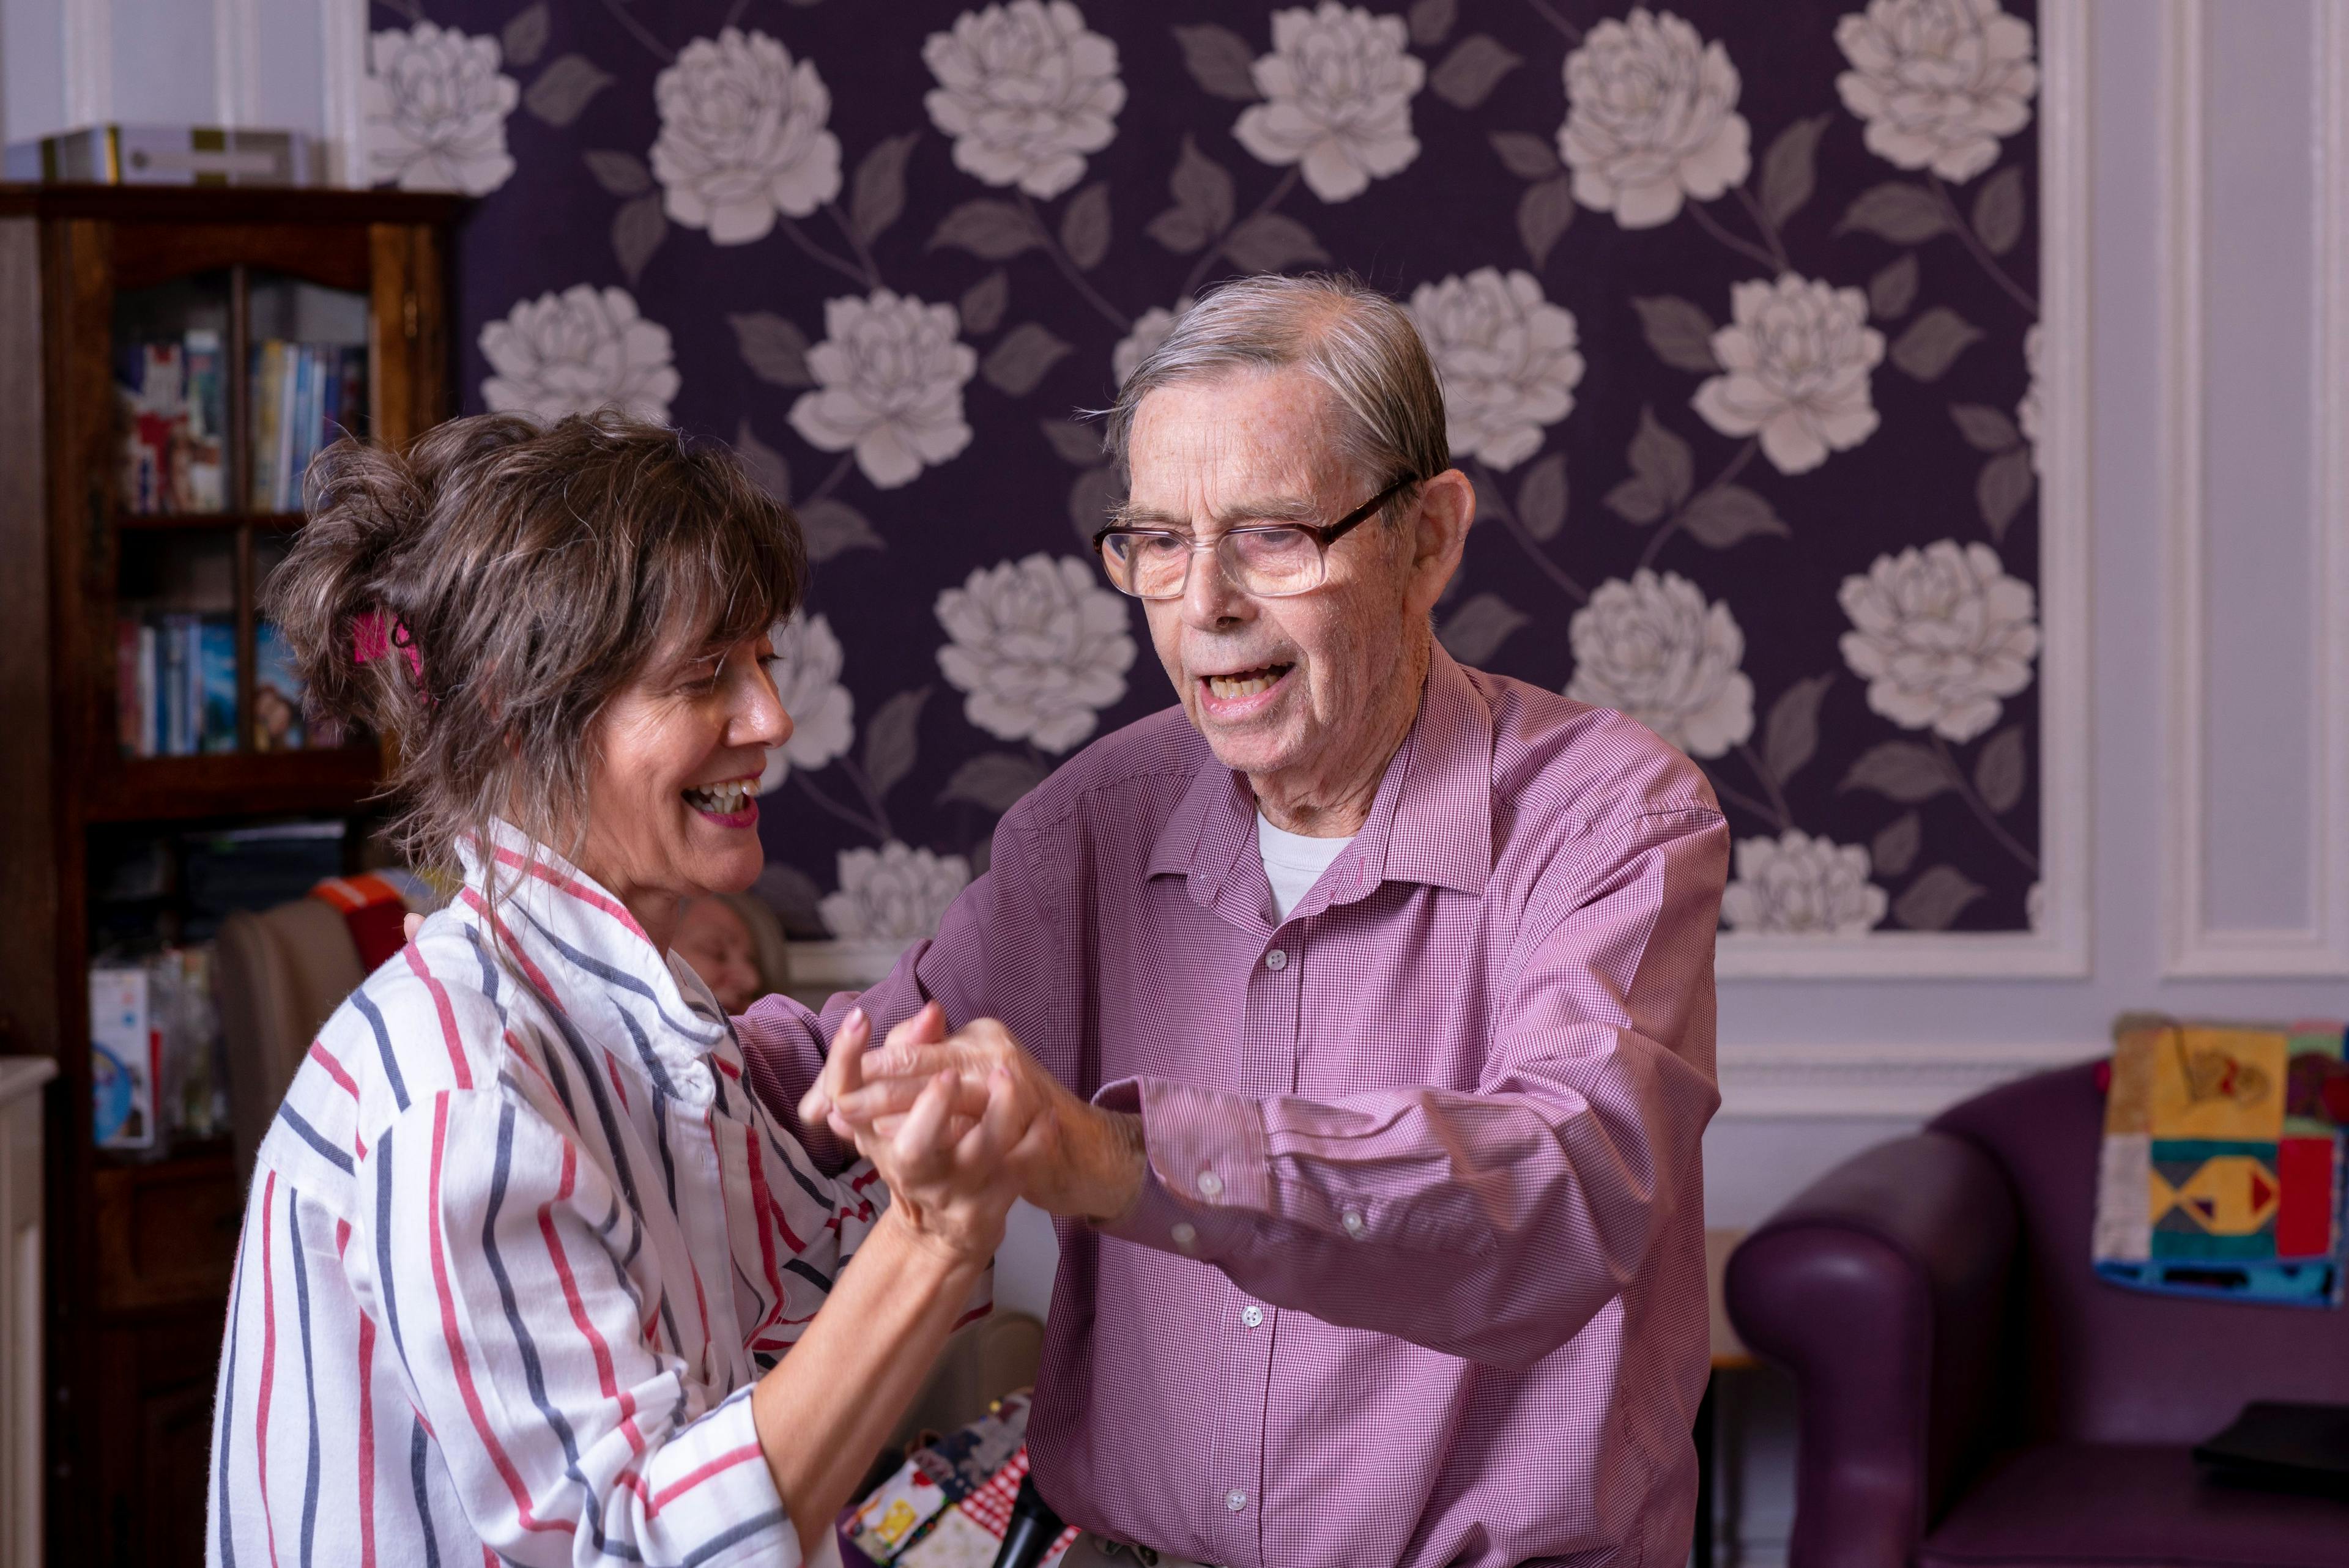 Residents of Woodlands Park care home in Great Missenden, Buckinghamshire